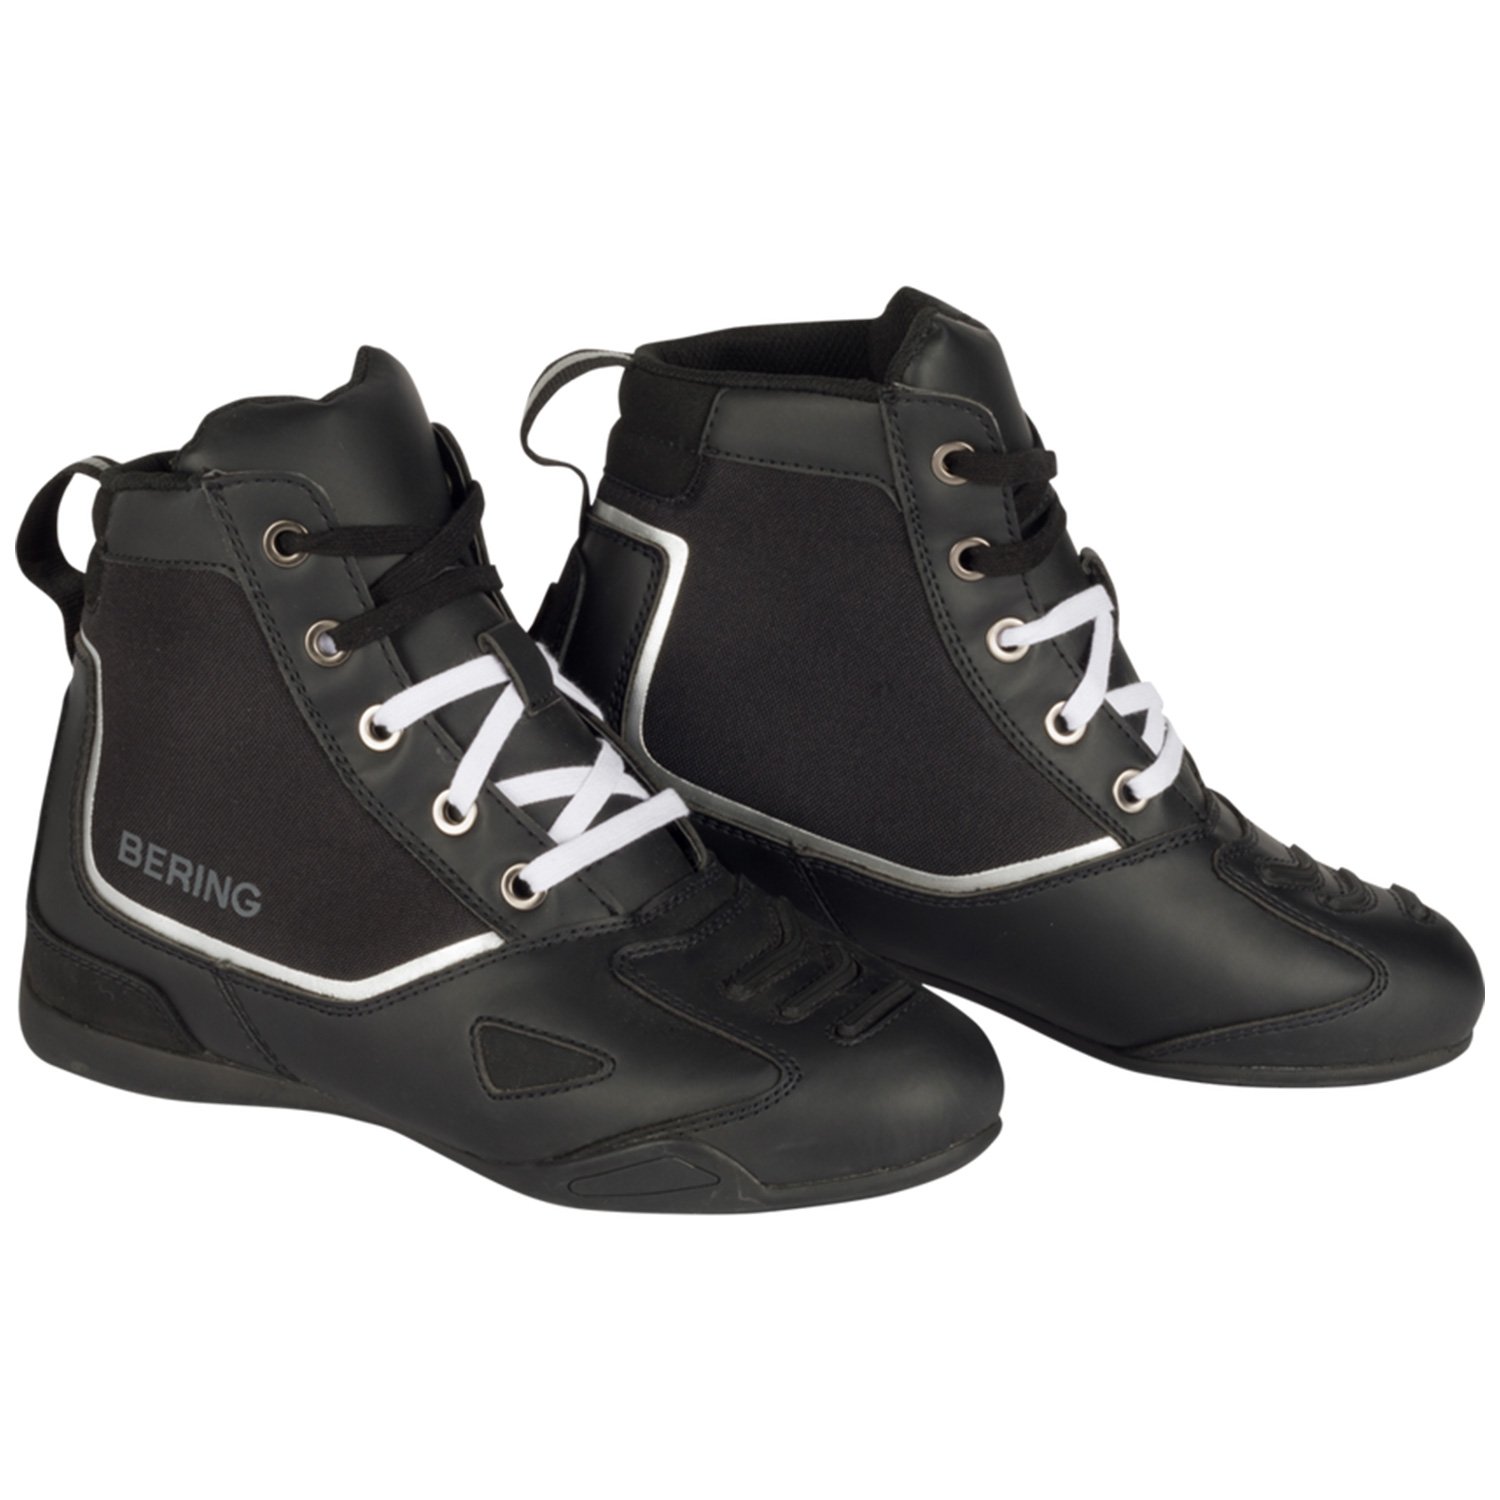 Image of Bering Active Shoes Black Size 44 ID 3660815184240